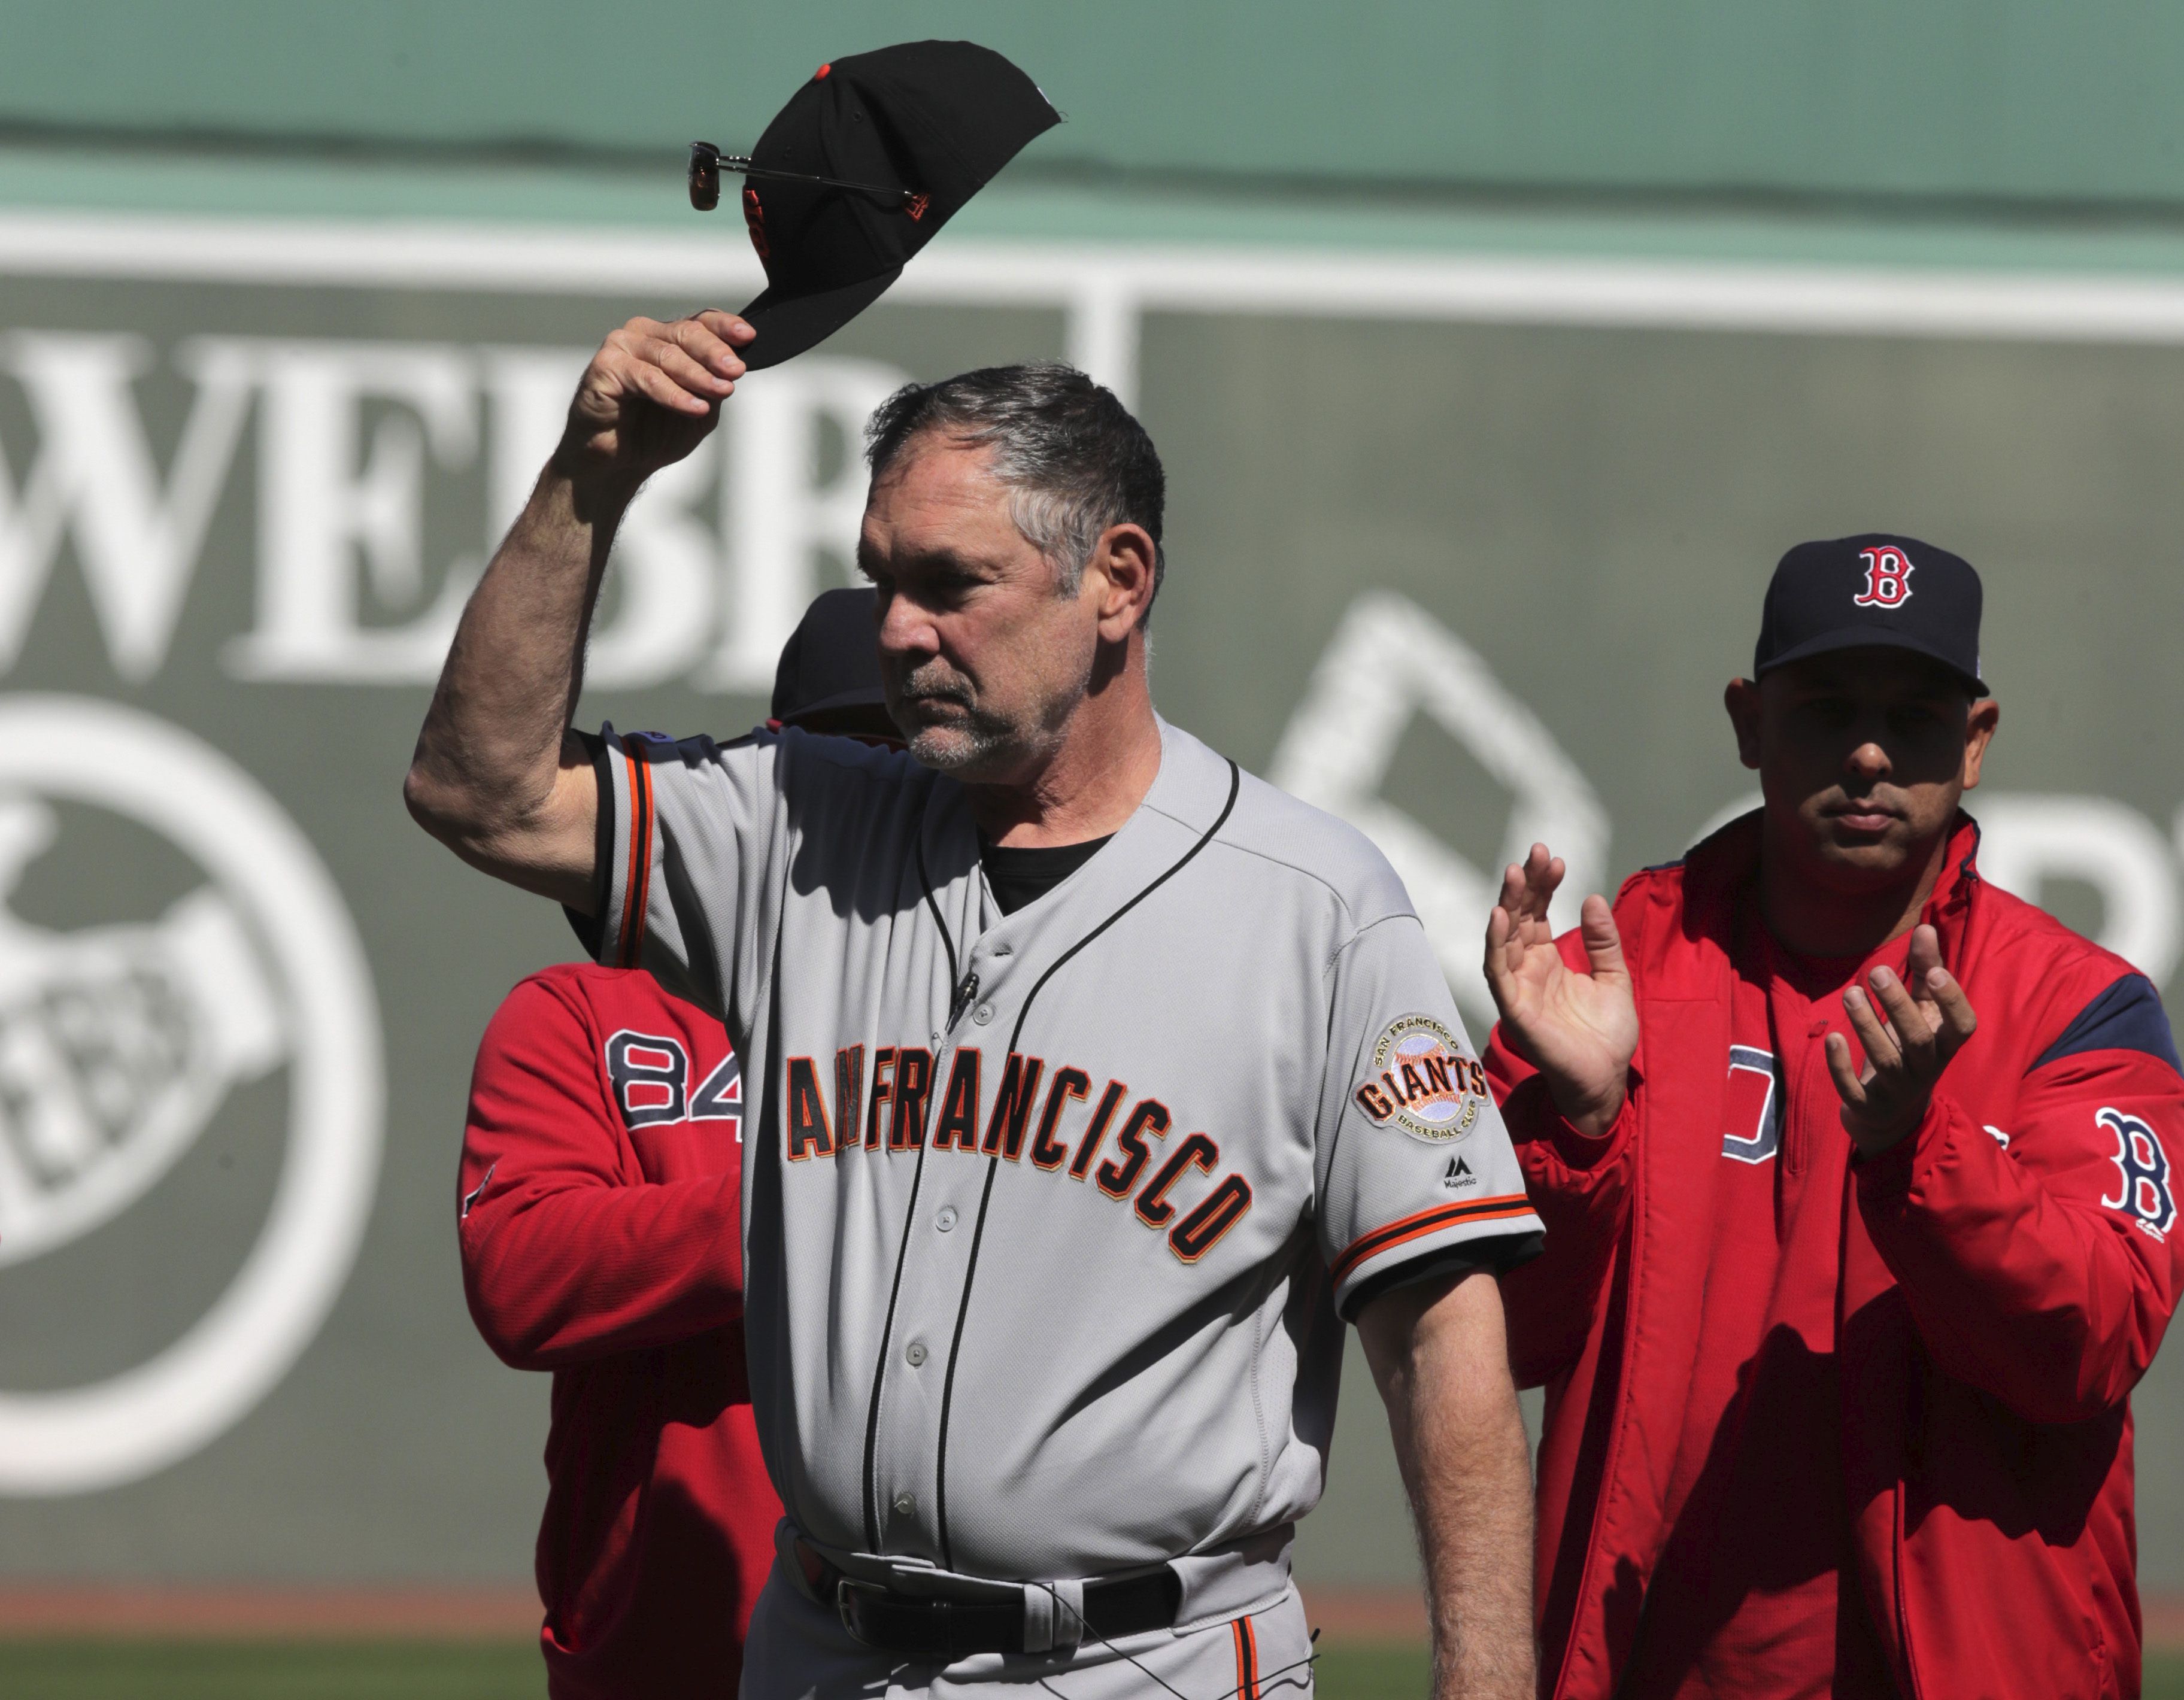 Bruce Bochy returning to Giants' ballpark and what is likely to be